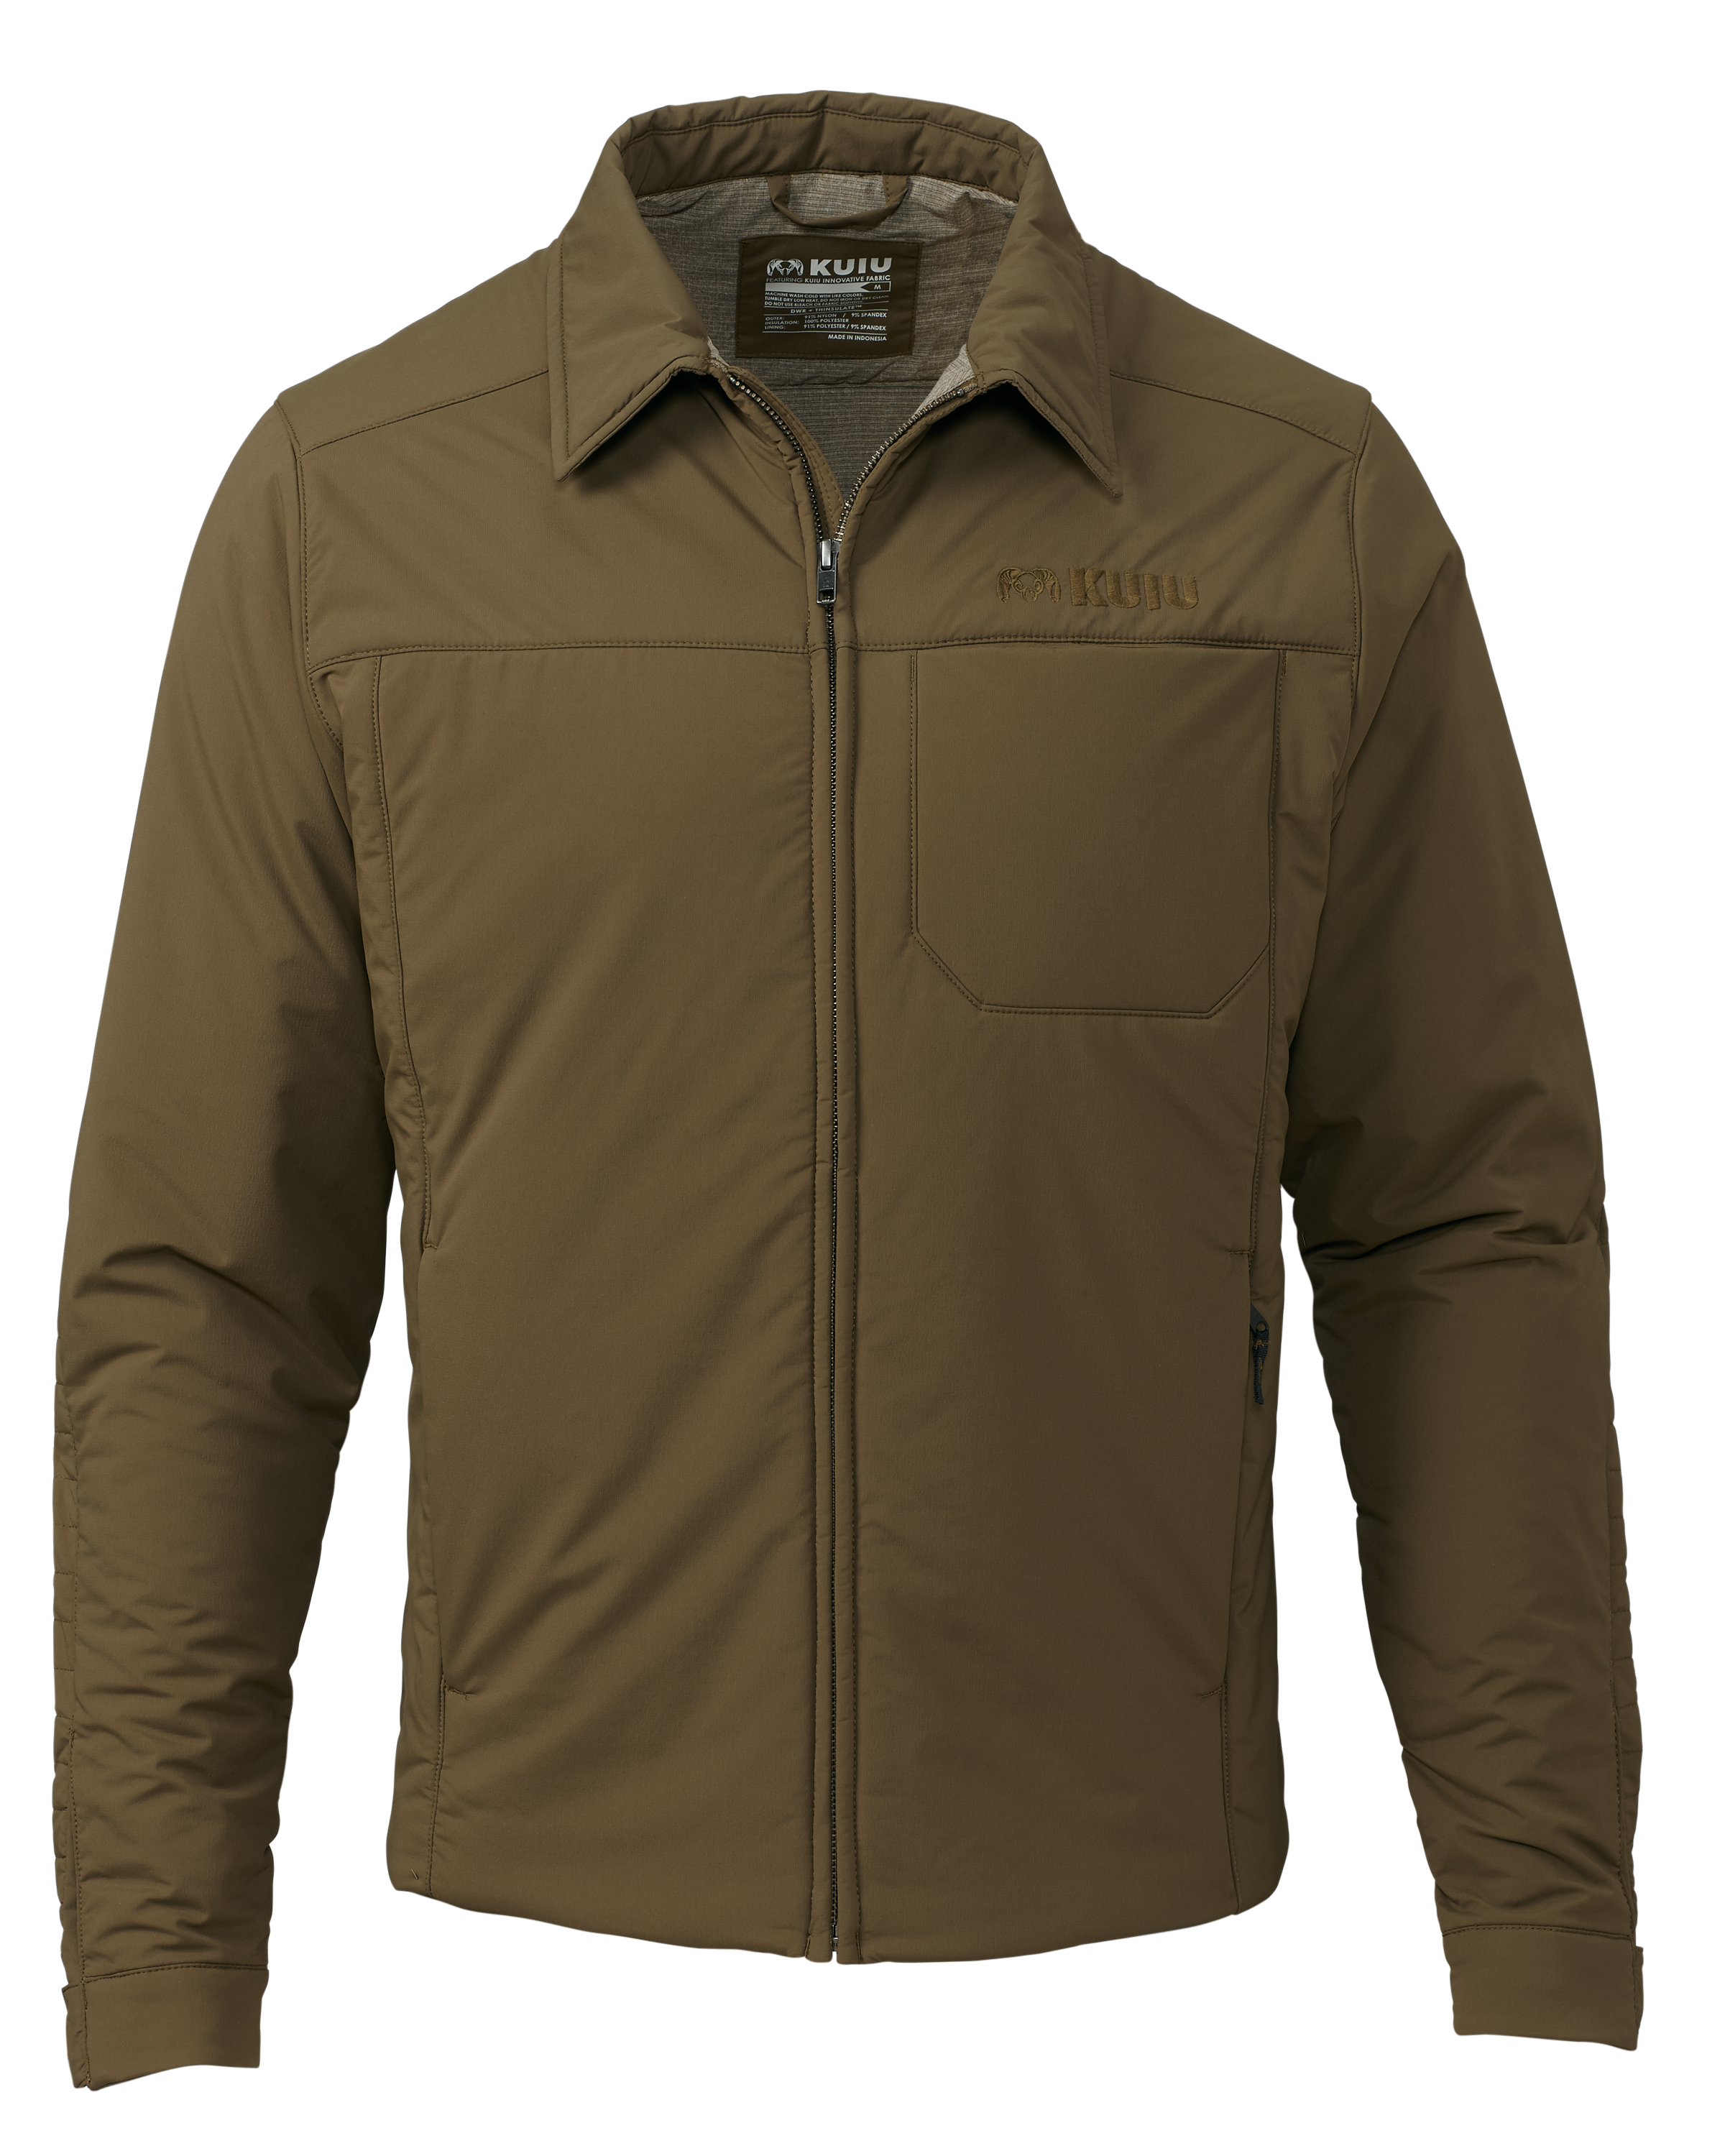 KUIU Outlet Fairbanks Hunting Jacket in Bourbon | Size 3XL